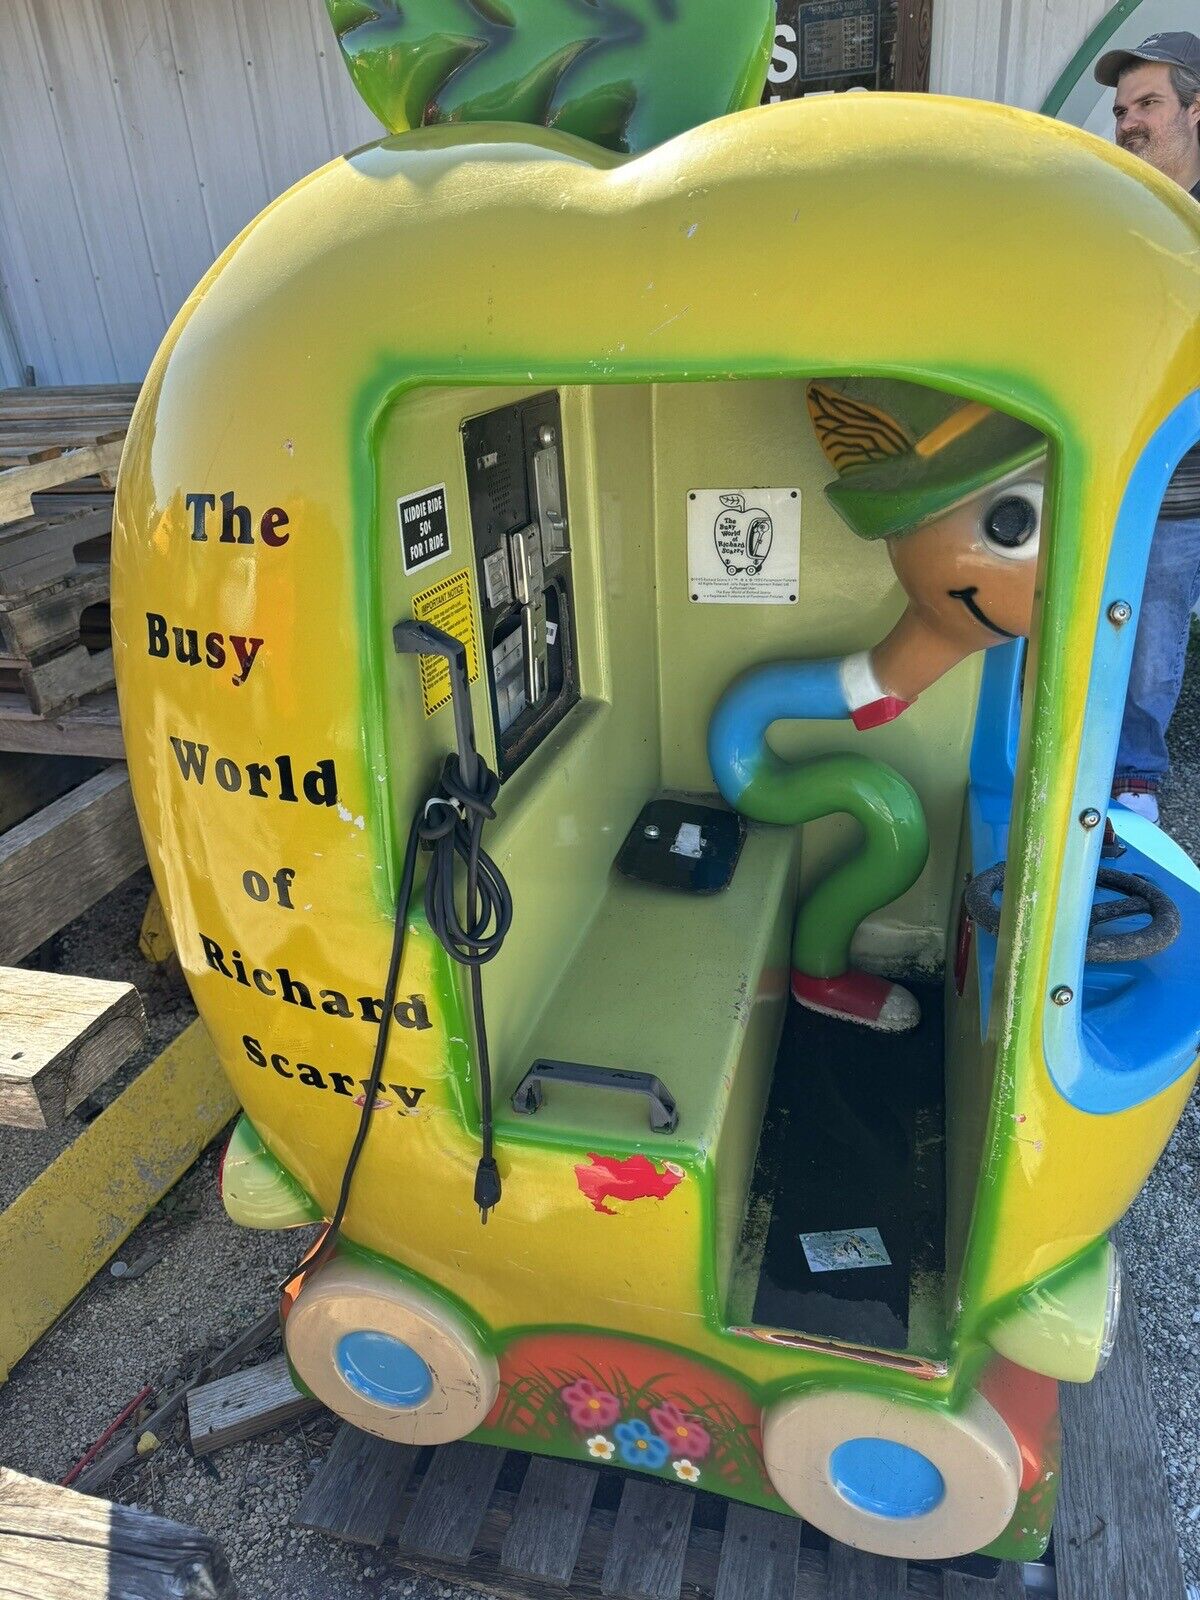 Kiddie Ride-The Busy World Of Richard Scarry Arcade Ride “As Is”